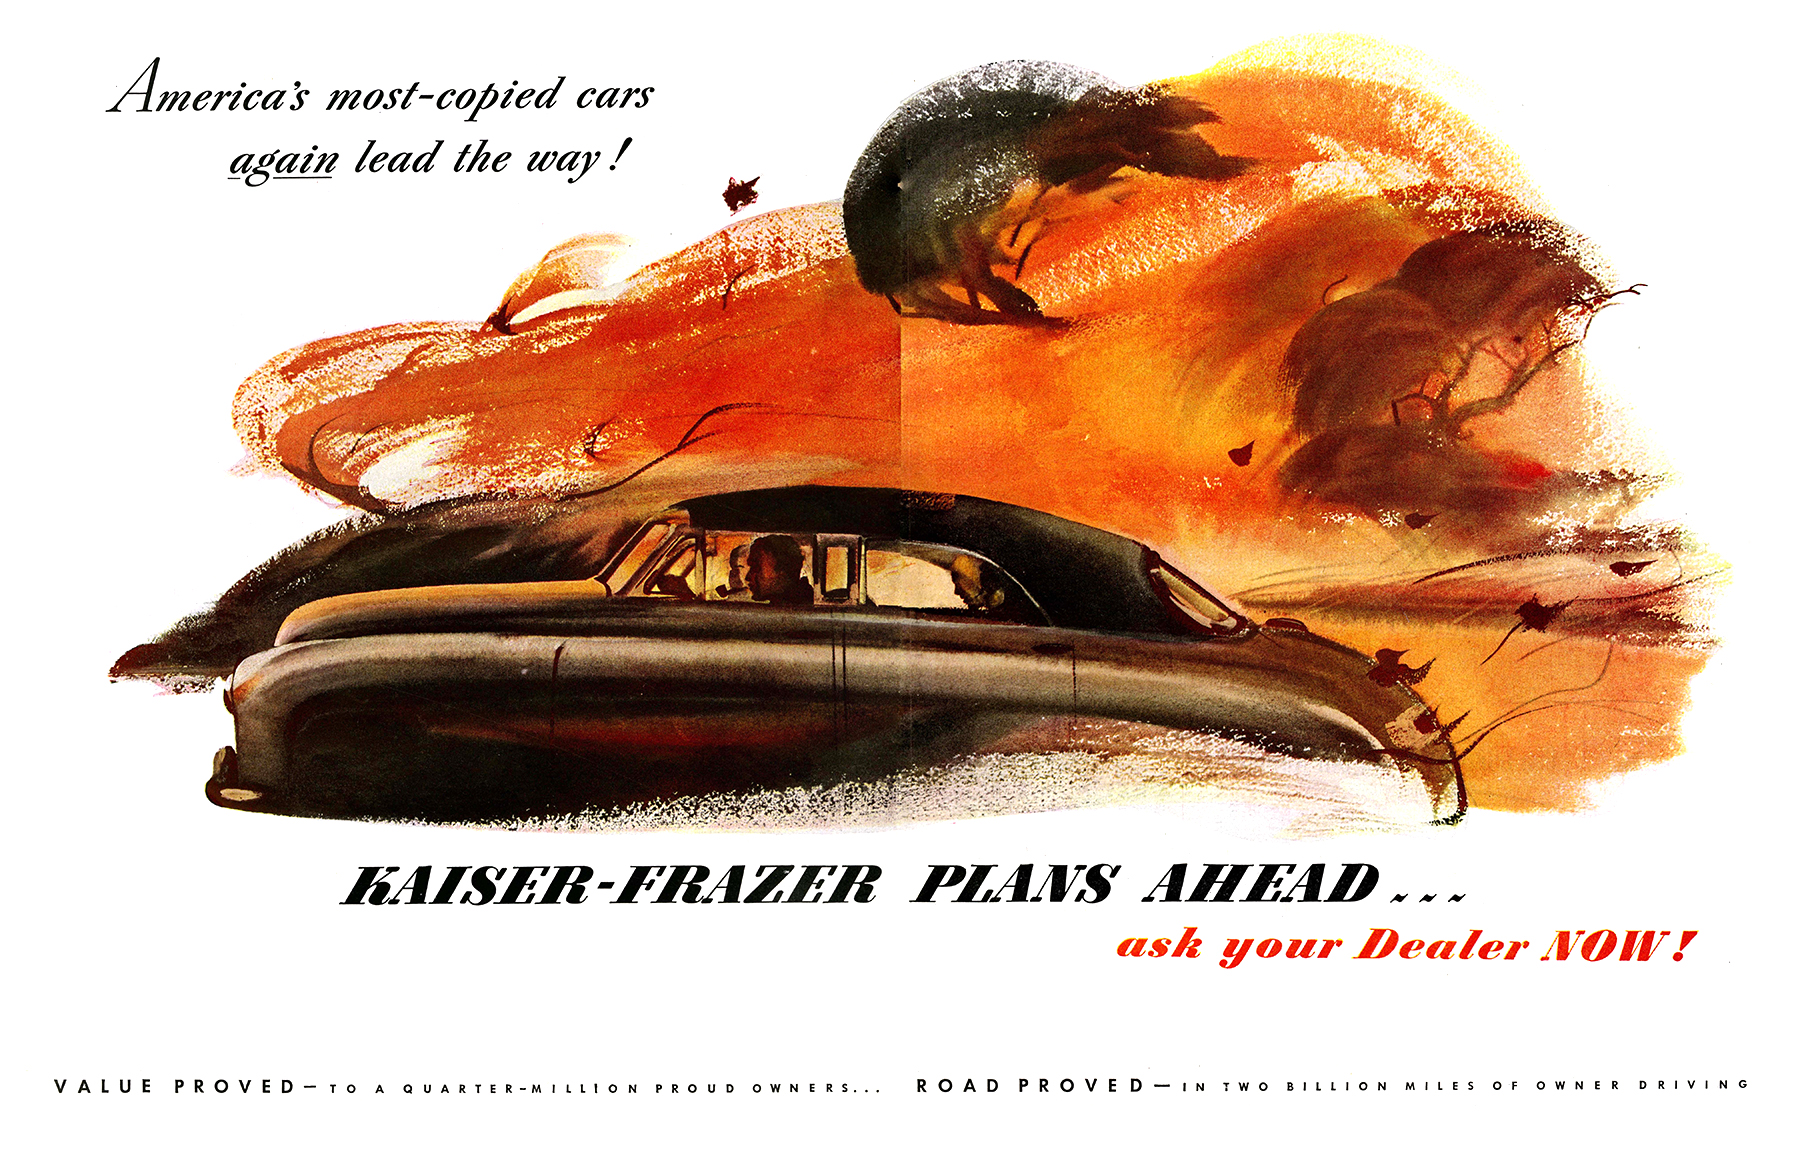 Kaiser-Frazer Ad (September, 1948) - America's most-copied cars again lead the way!